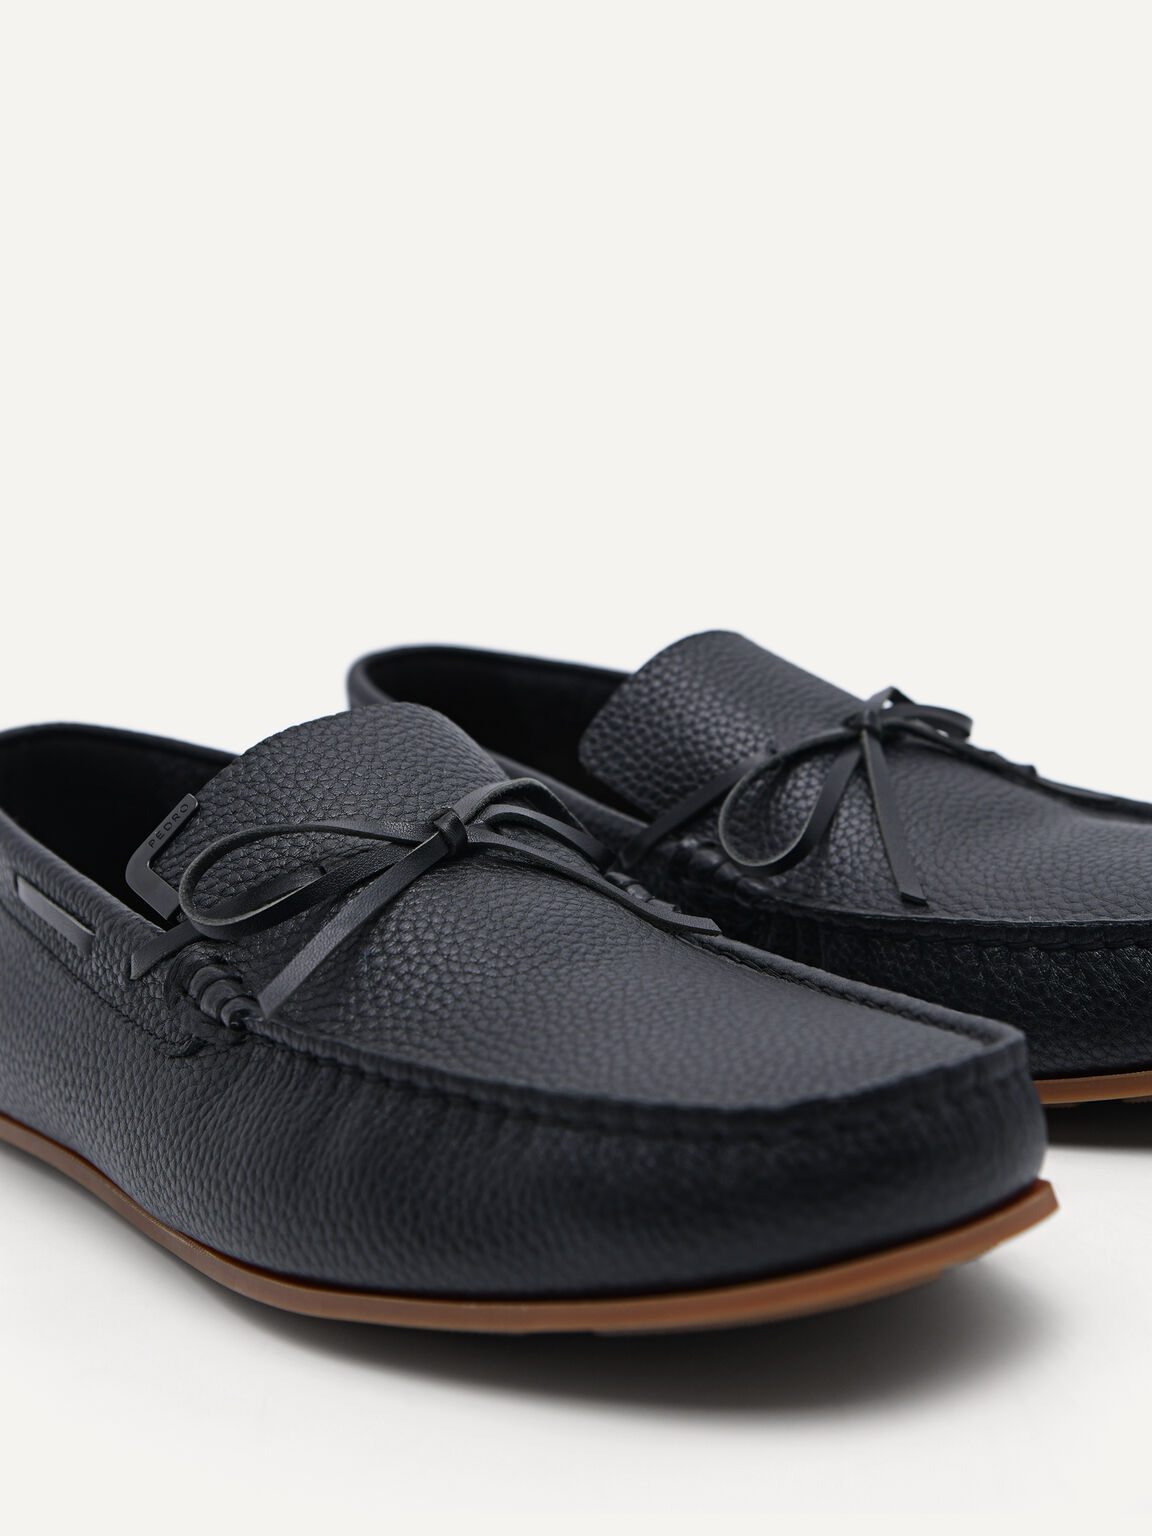 Leather Moccasins with Bow Detail, Black